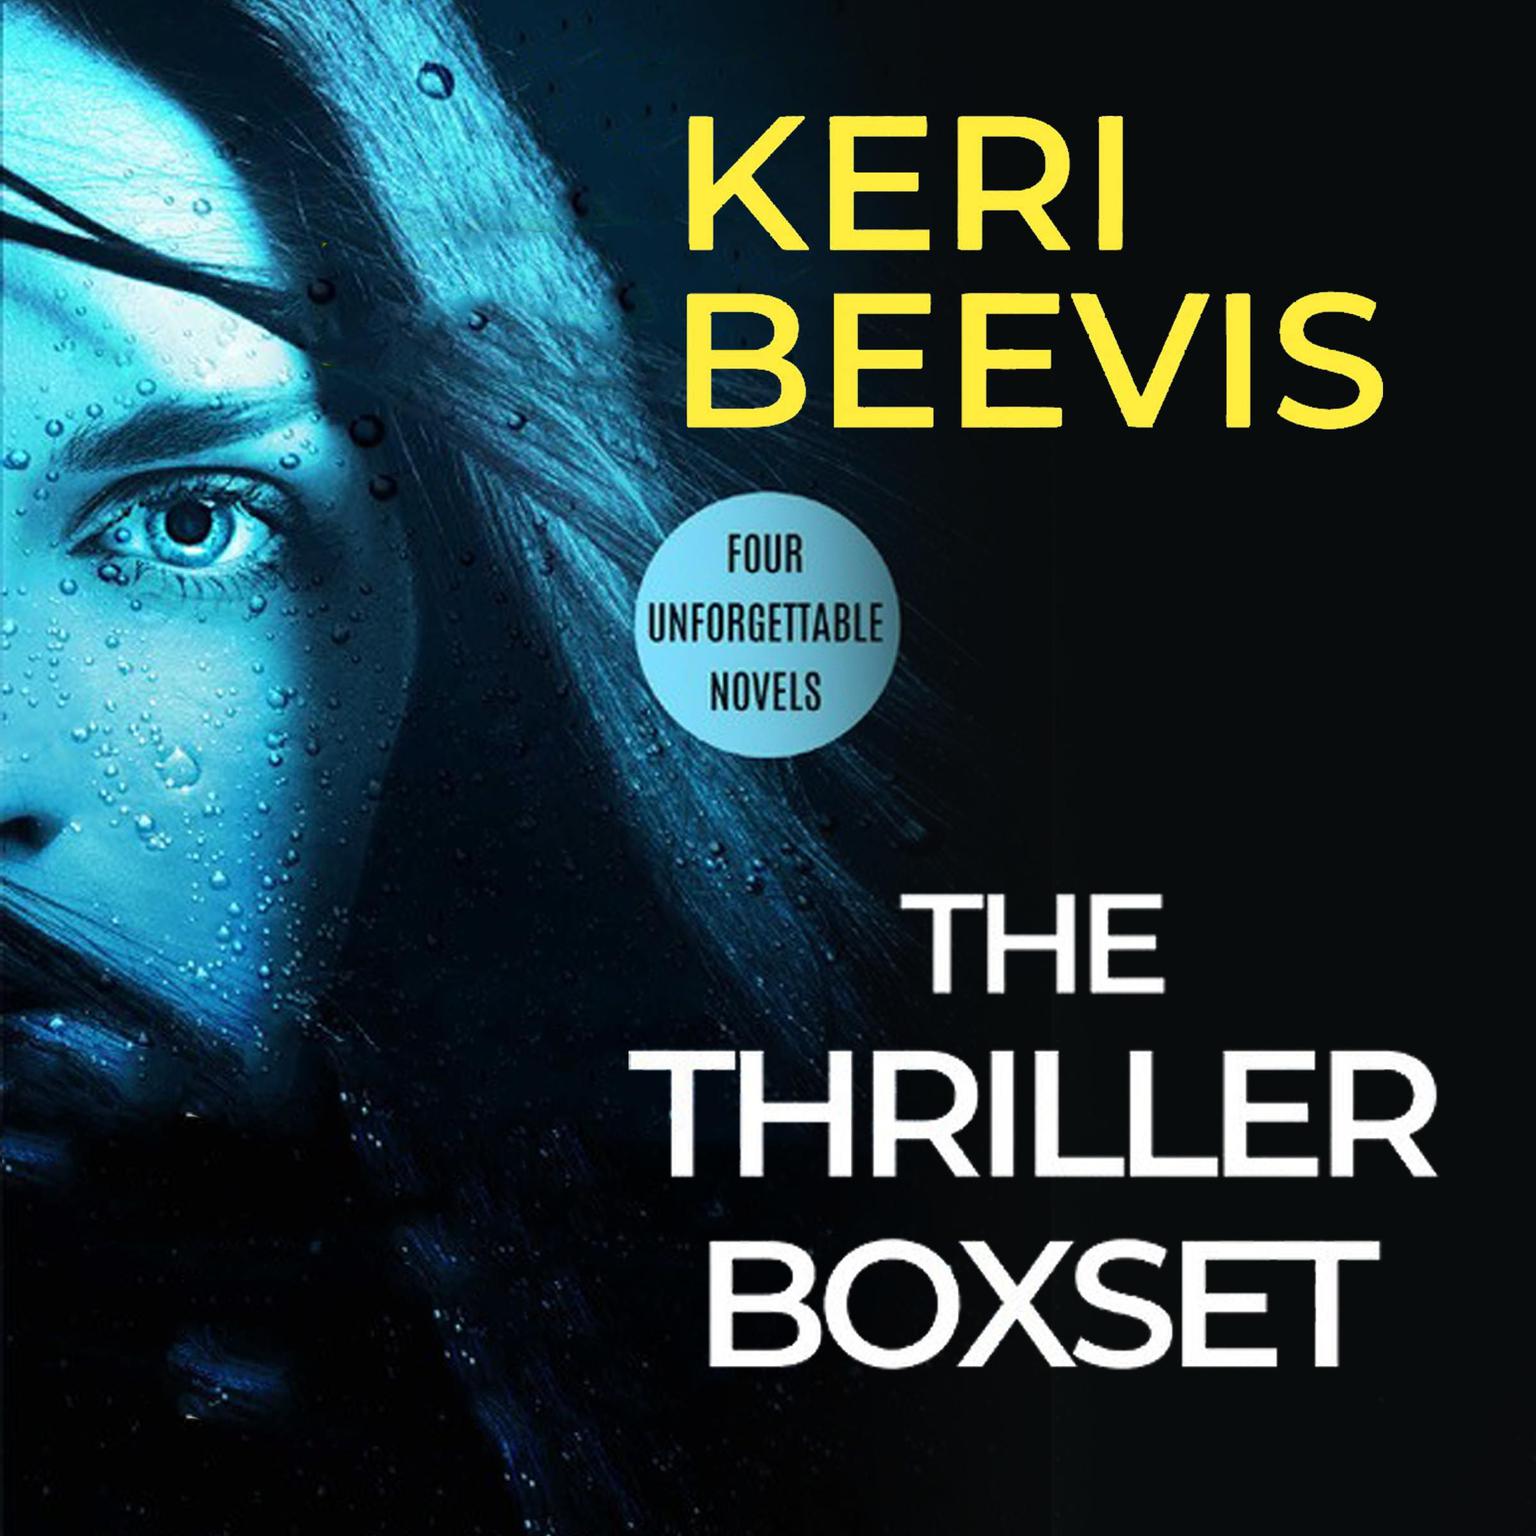 The Thriller Boxset: Dying to Tell, Every Little Breath, The People Next Door and Trust No One Audiobook, by Keri Beevis